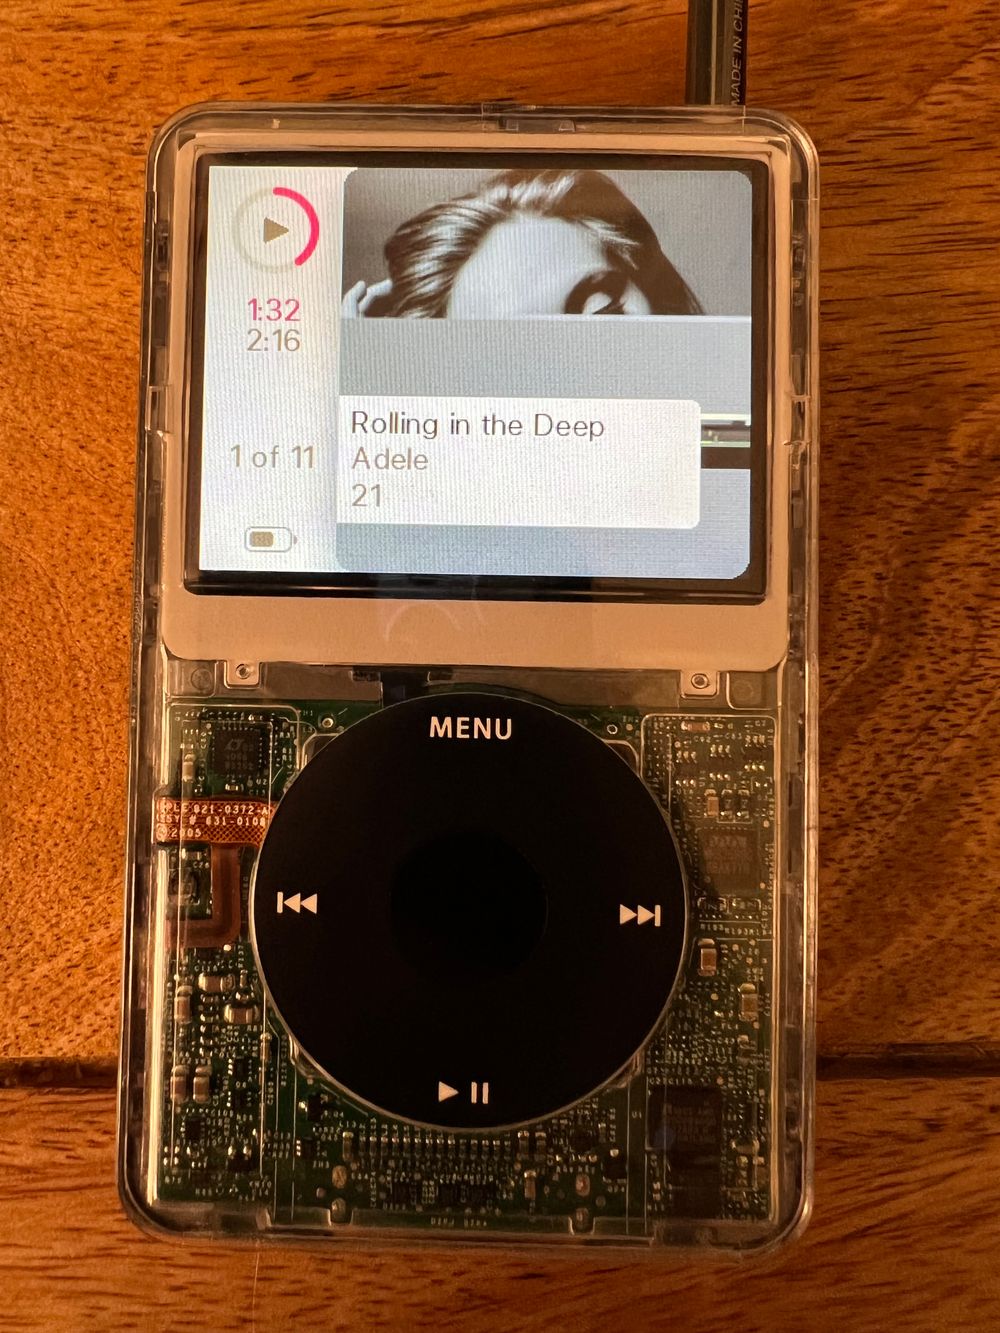 I reimagined what the iPod classic interface would look like in 2021! :  r/UI_Design